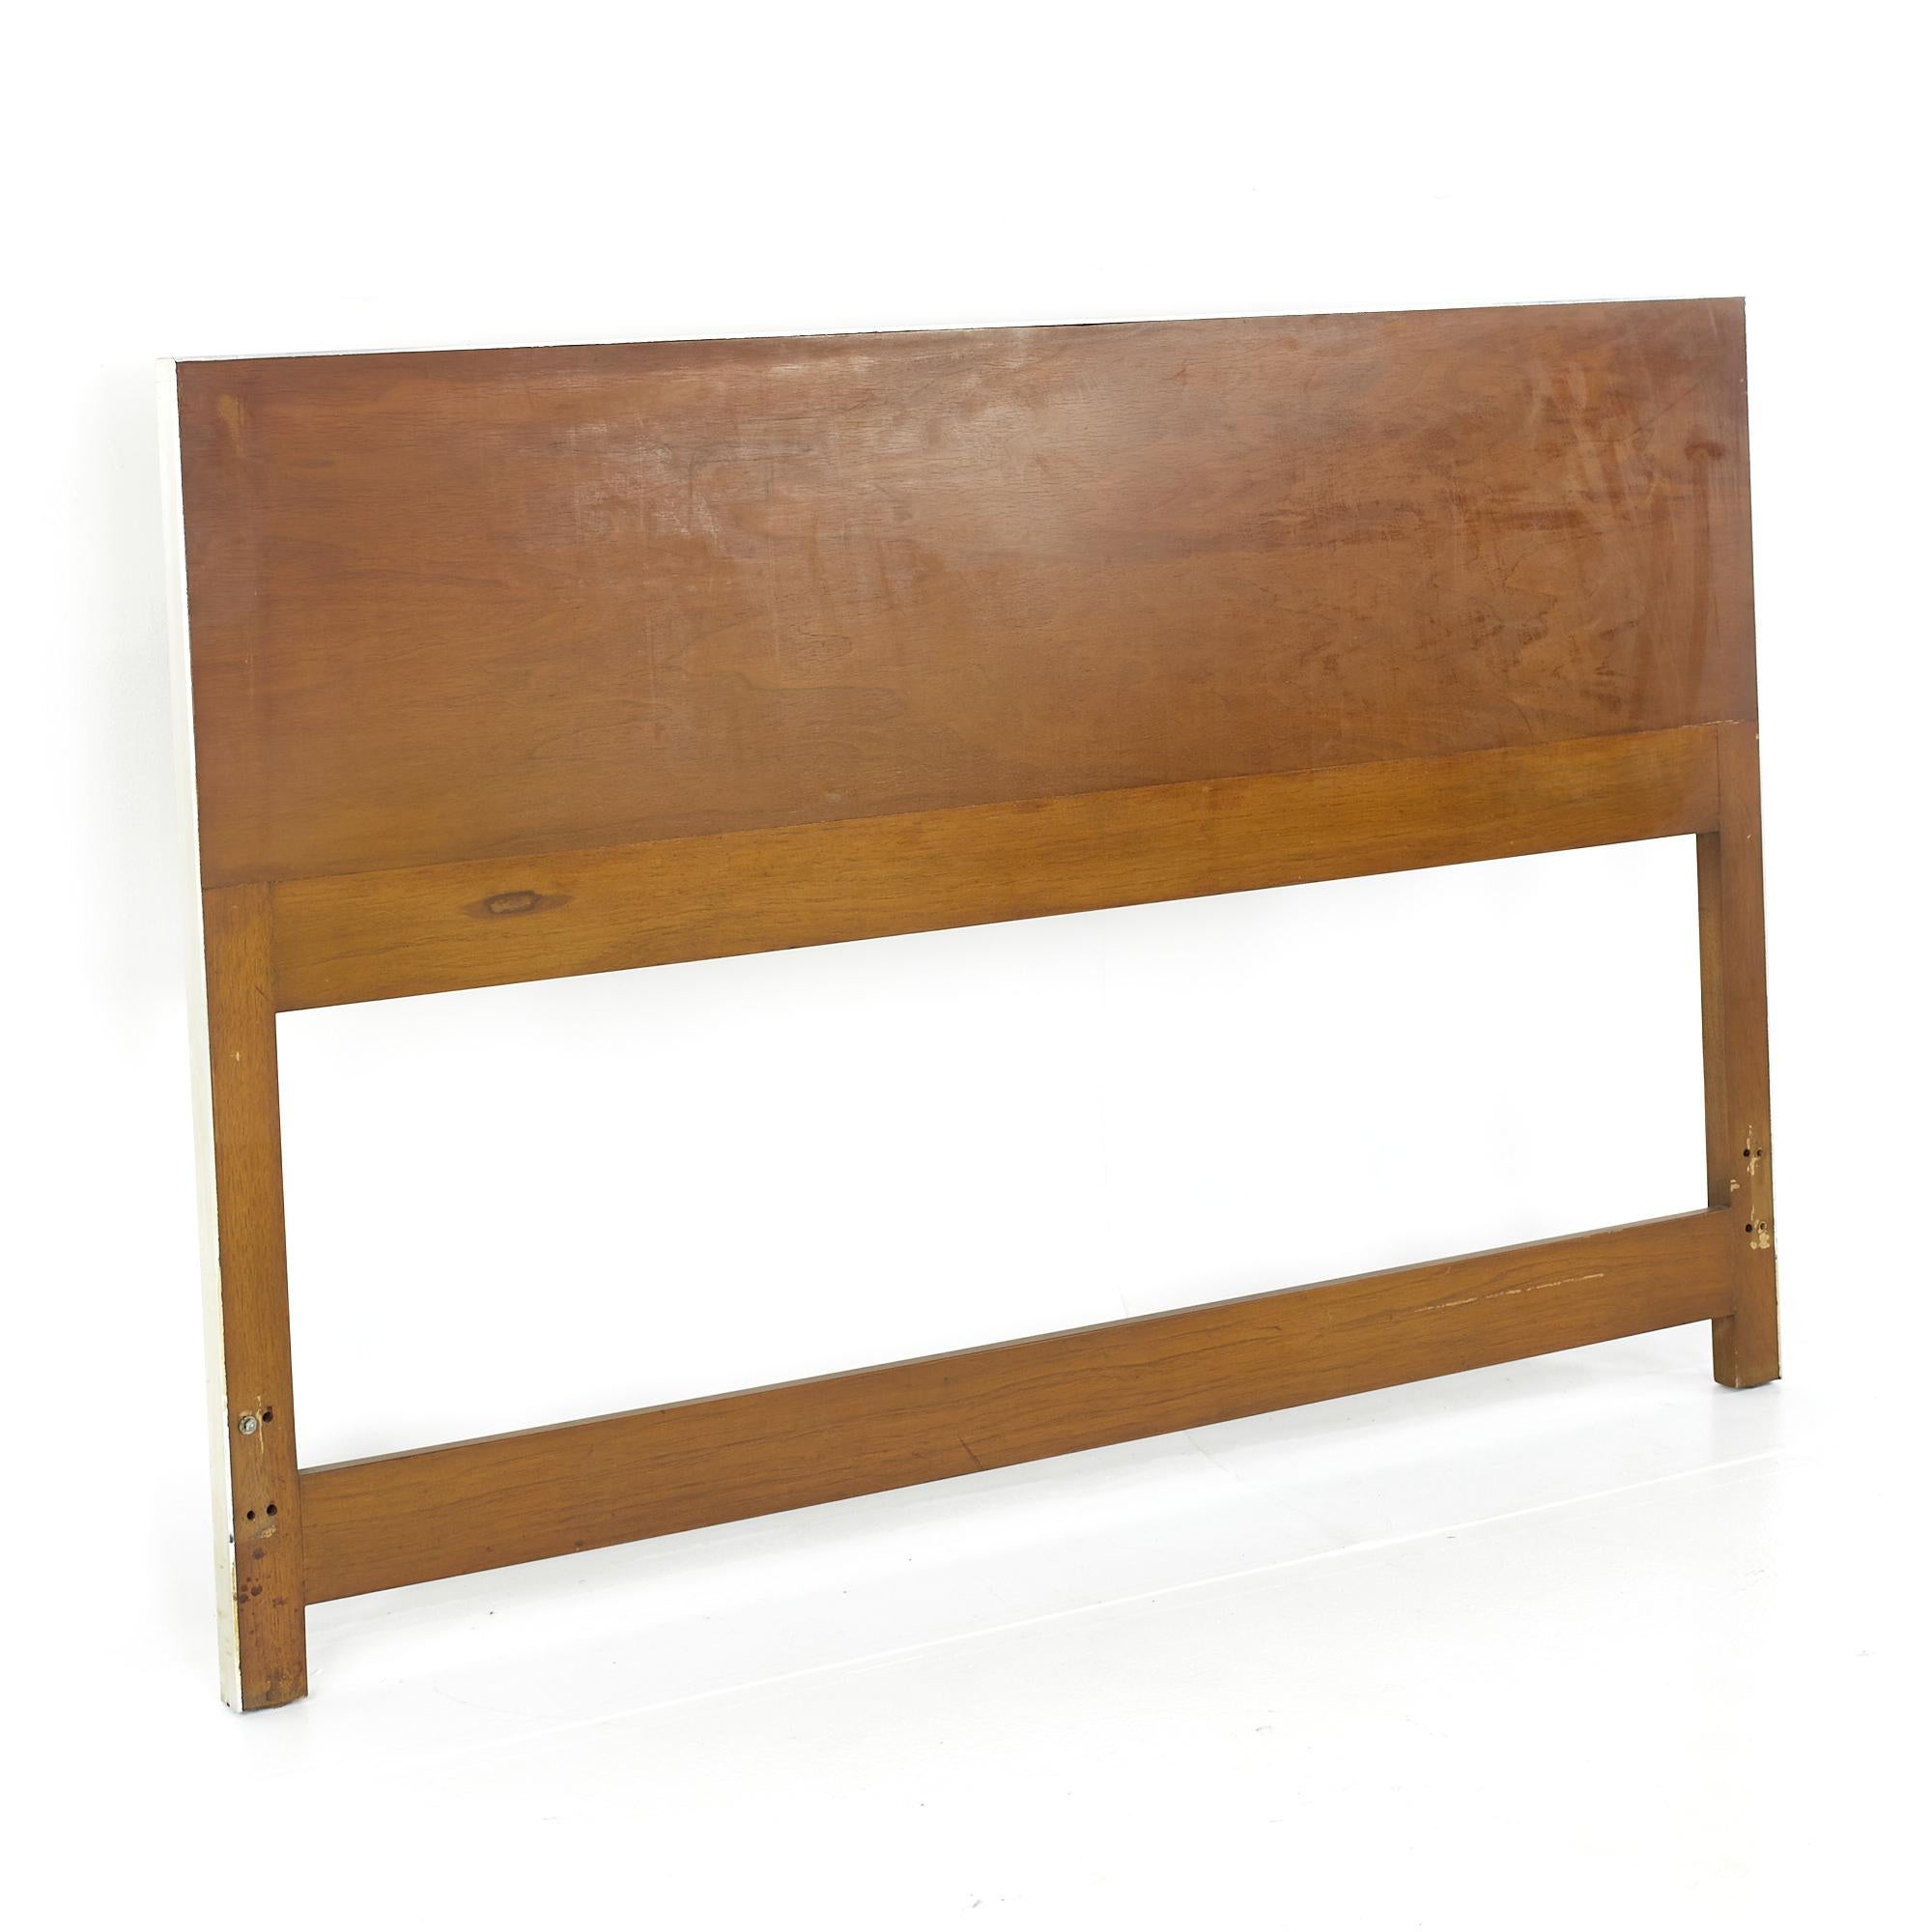 Paul McCobb for Calvin Linear Mid Century Walnut and stainless steel full headboard

This headboard measures: 54 wide x 1.25 deep x 36.25 inches high

All pieces of furniture can be had in what we call restored vintage condition. That means the